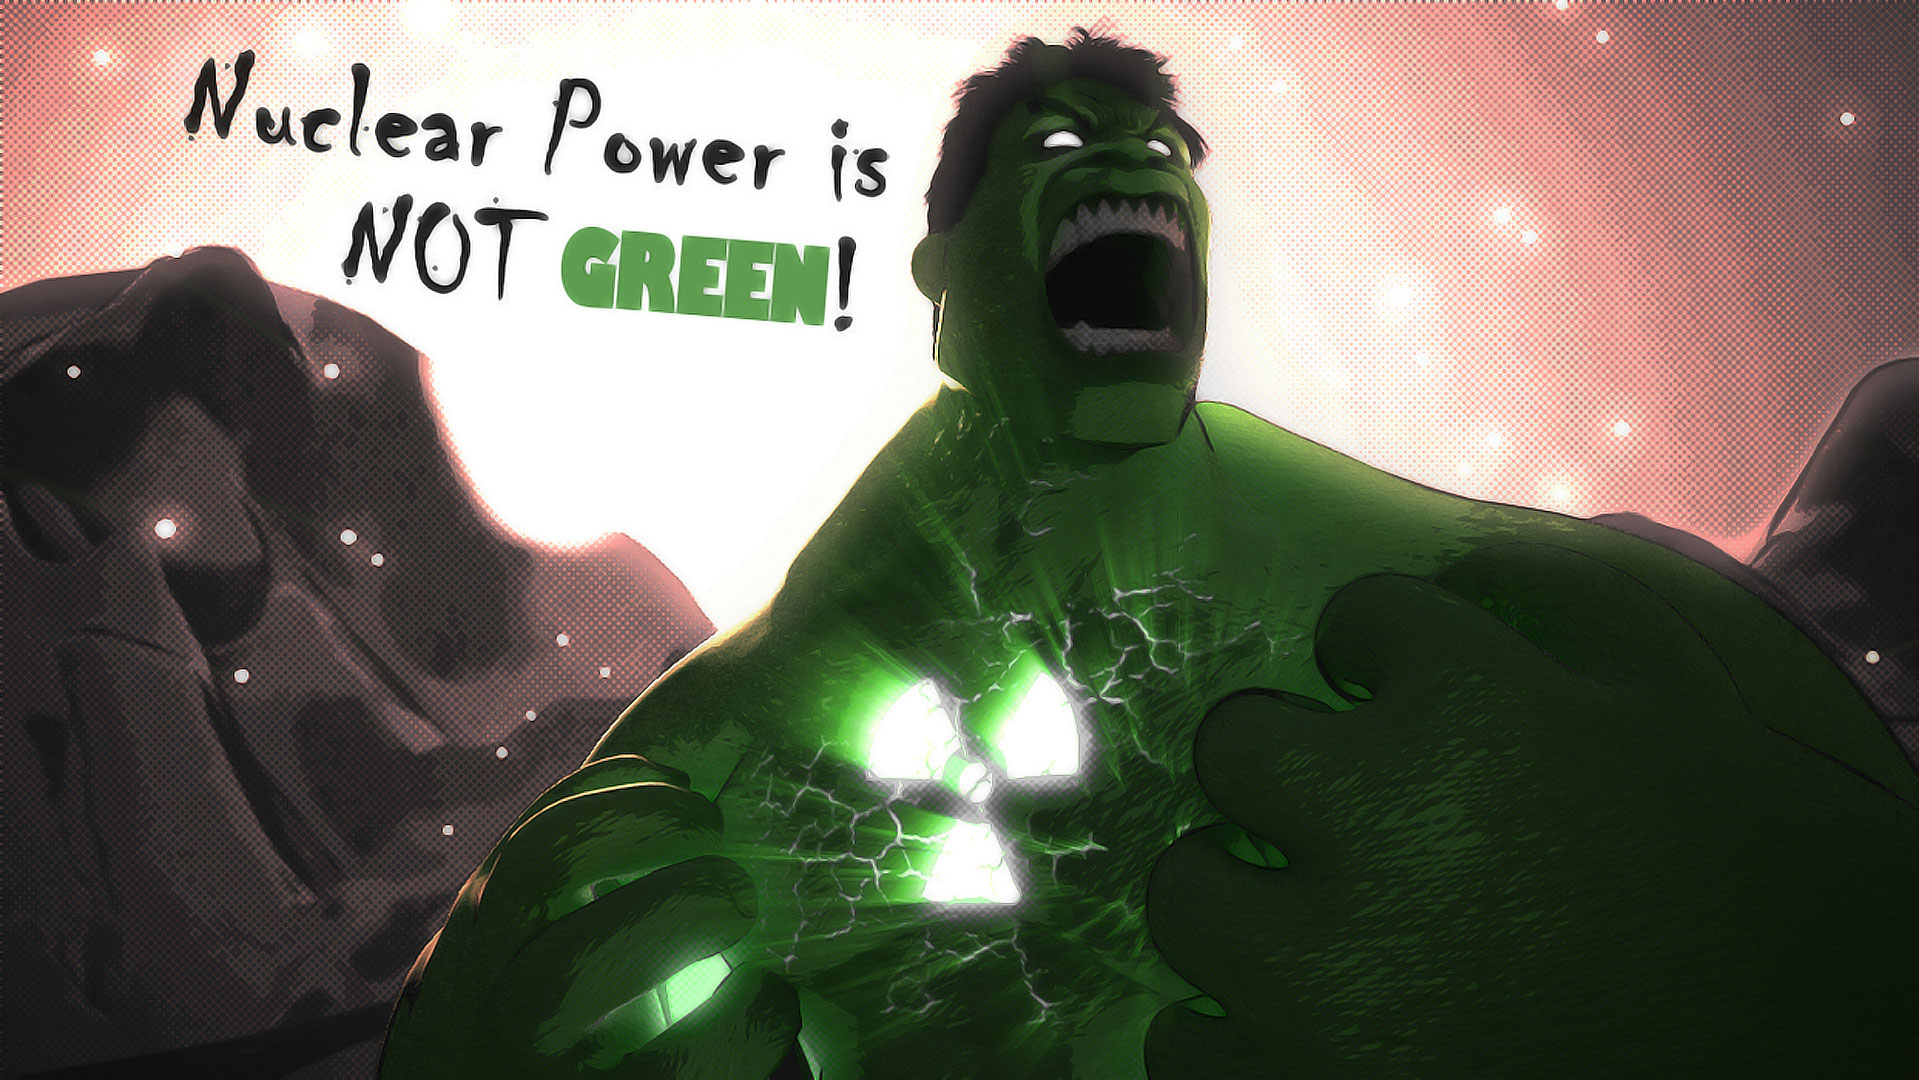 Nuclear Power is NOT GREEN!